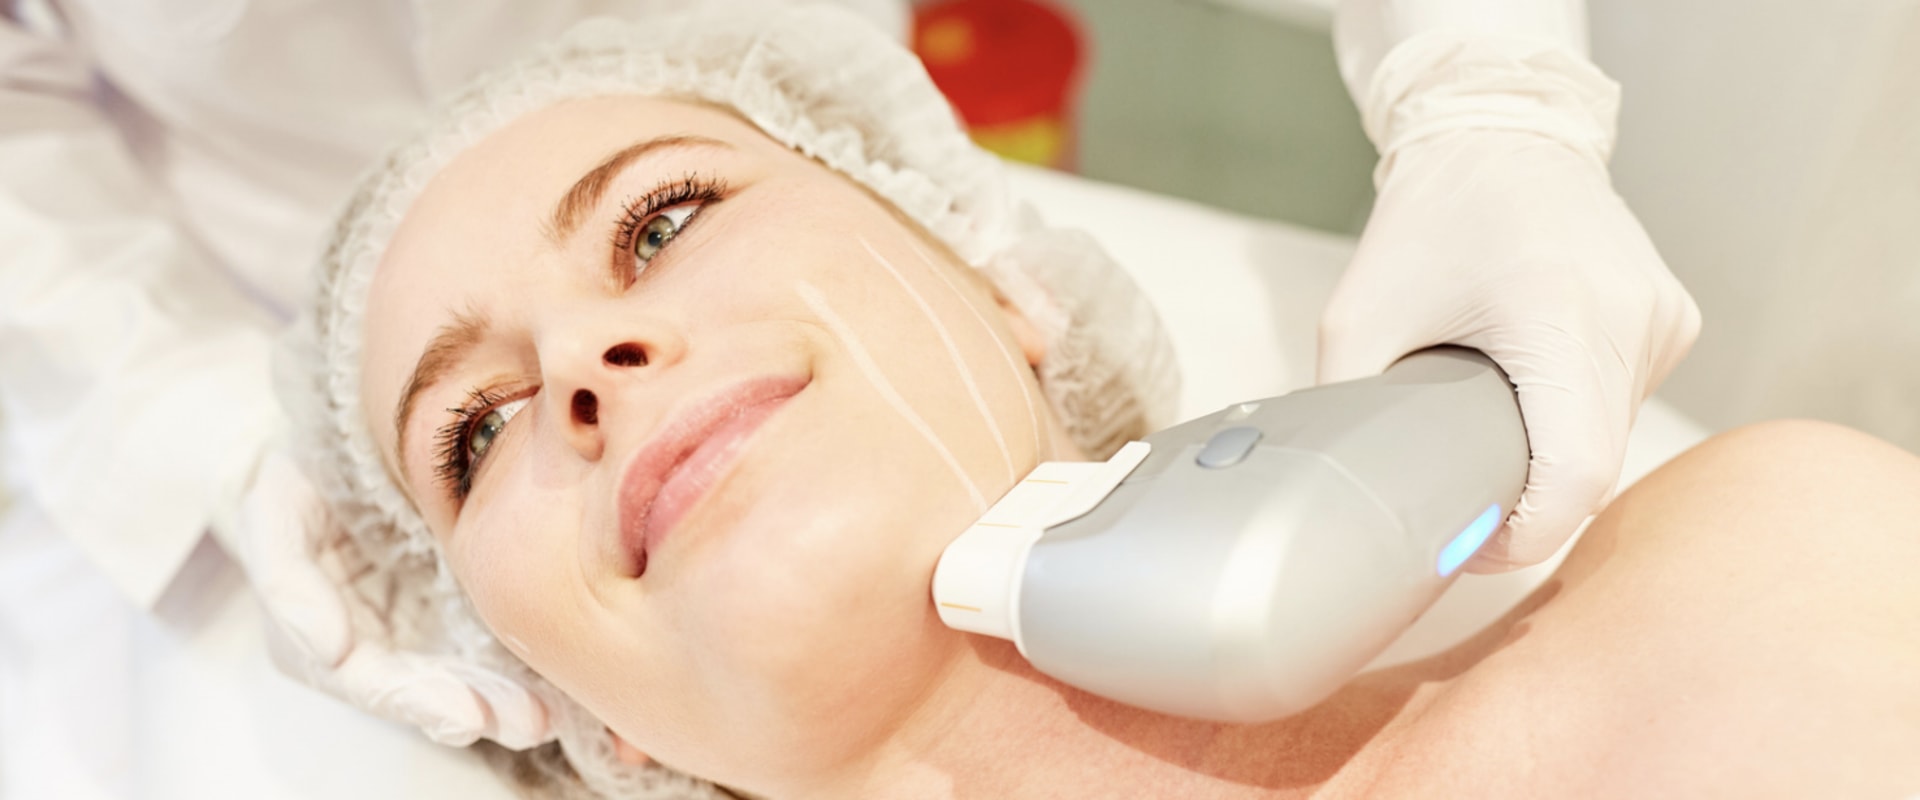 Who is the Best Candidate for Morpheus8 Skin Rejuvenation Treatment?